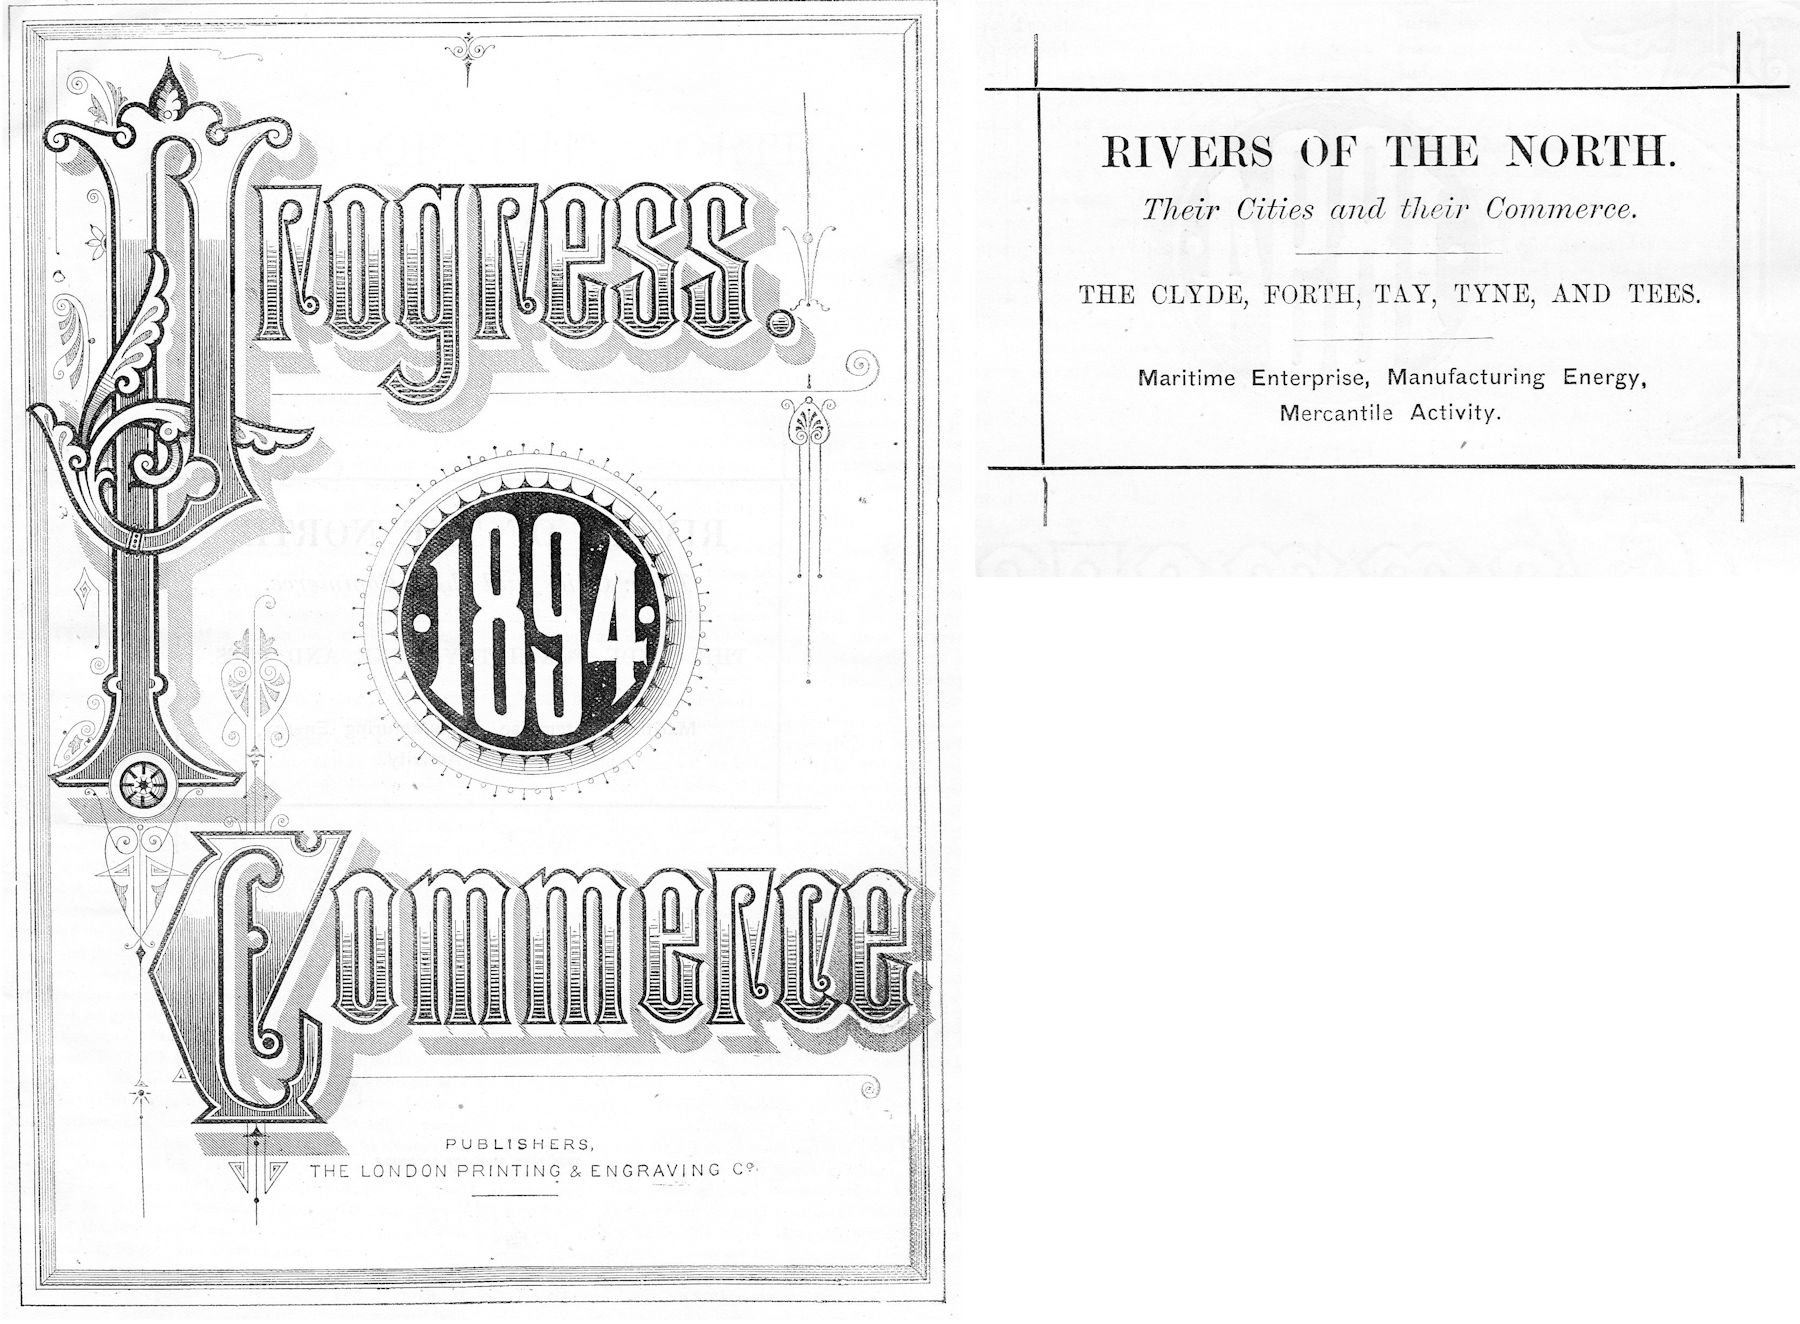 http://messybeast.com/1894-rivers-of-the-north/1894-rivers-of-the-north-1.jpg